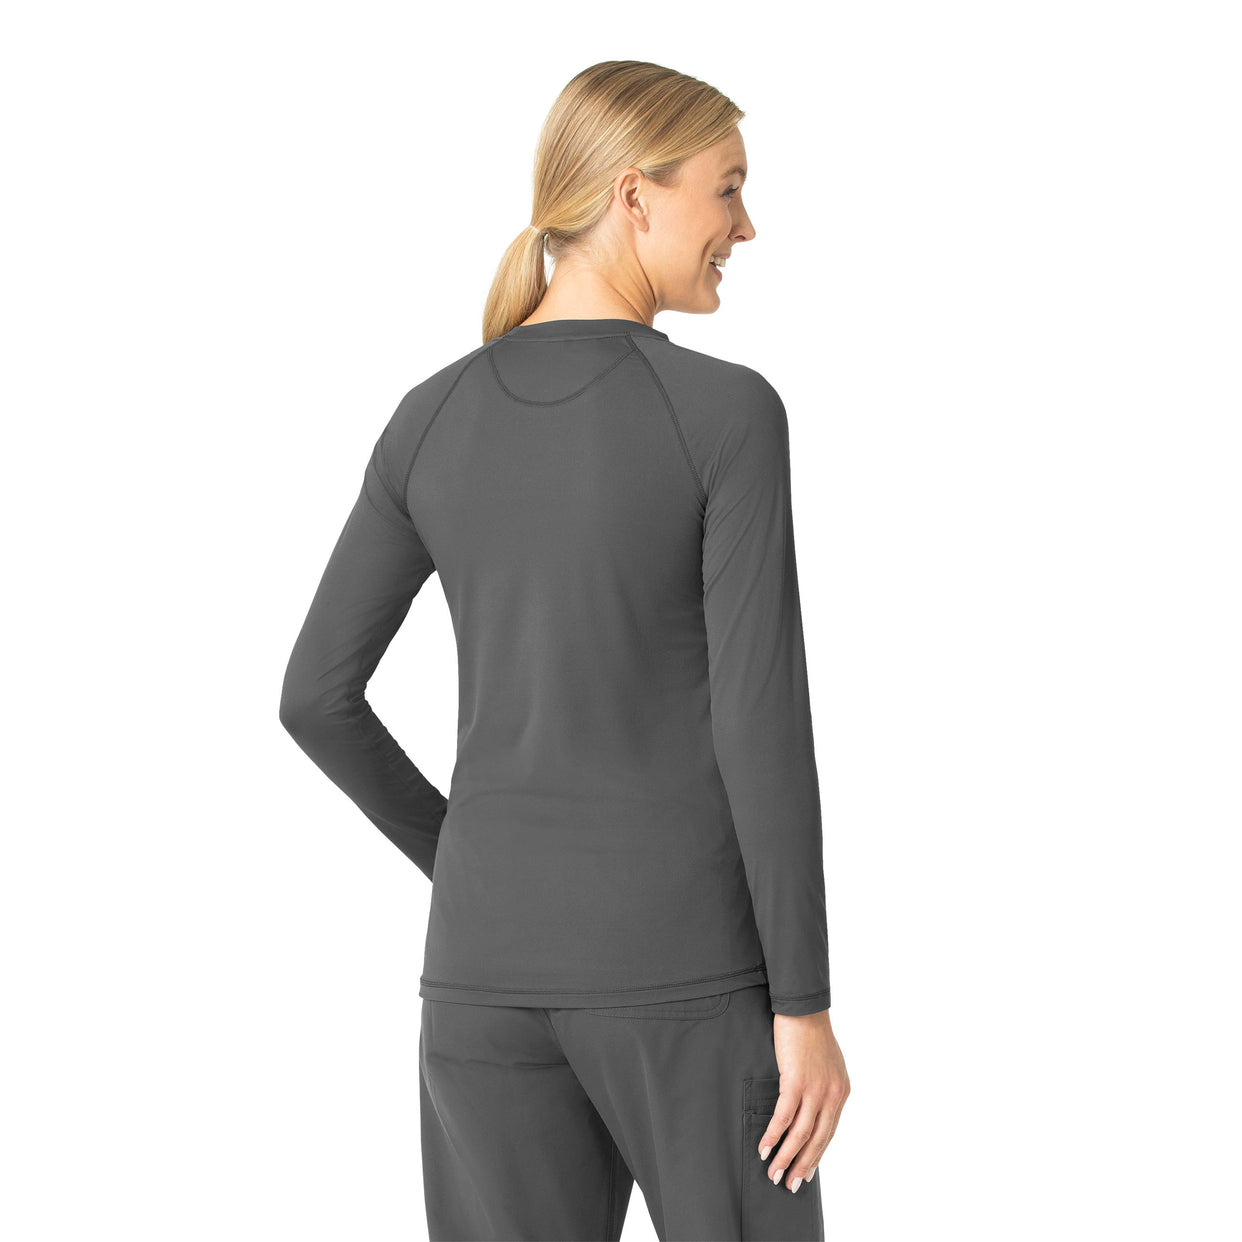 Force Sub-Scrubs Women's Performance Long Sleeve Tee Pewter back view